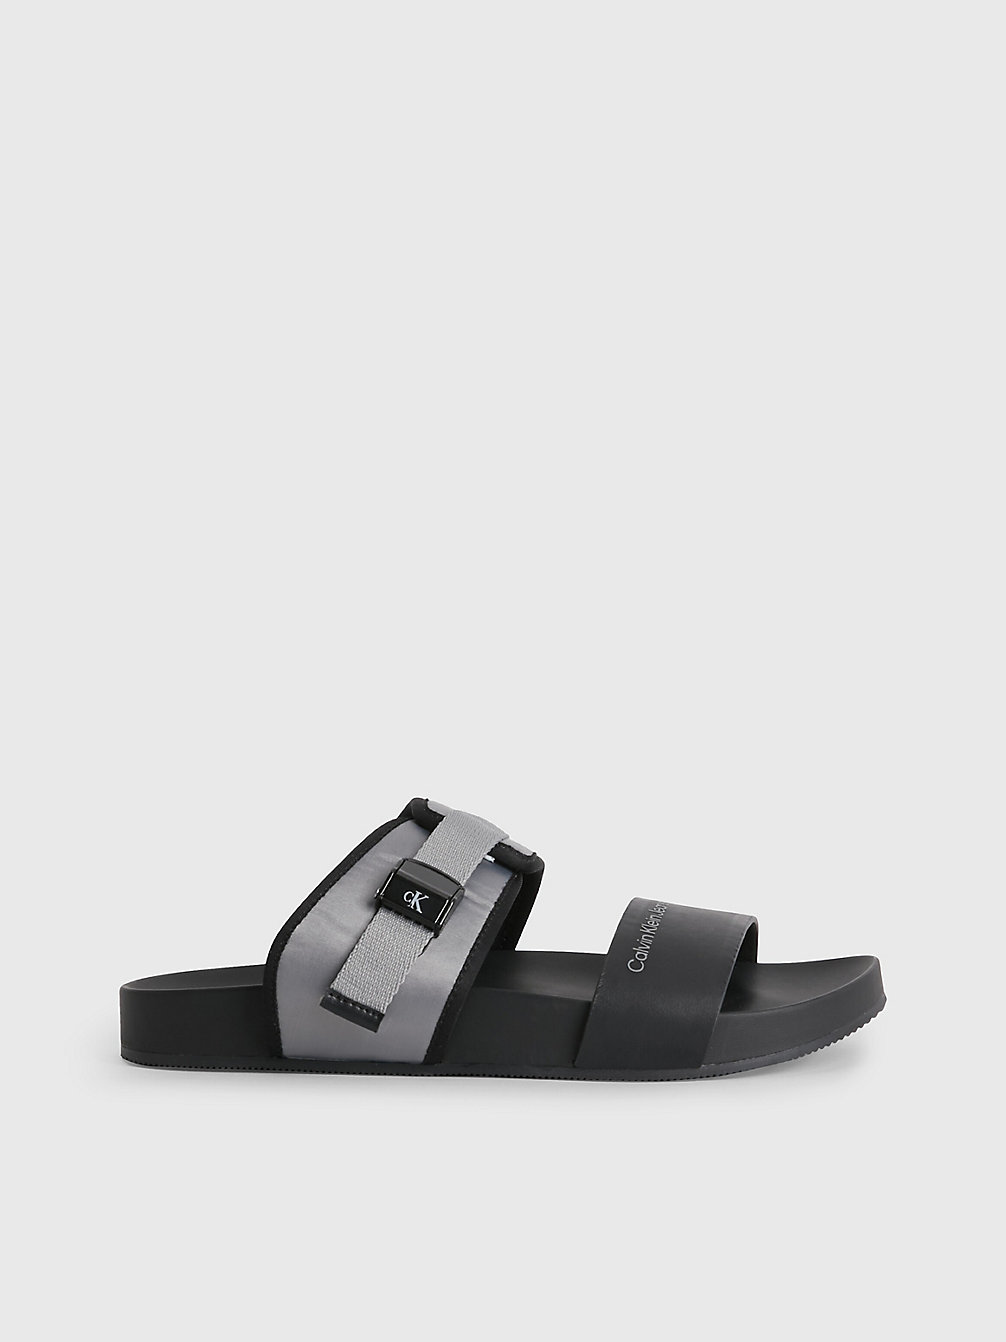 BLACK/OVERCAST GREY Recycled Sandals undefined women Calvin Klein